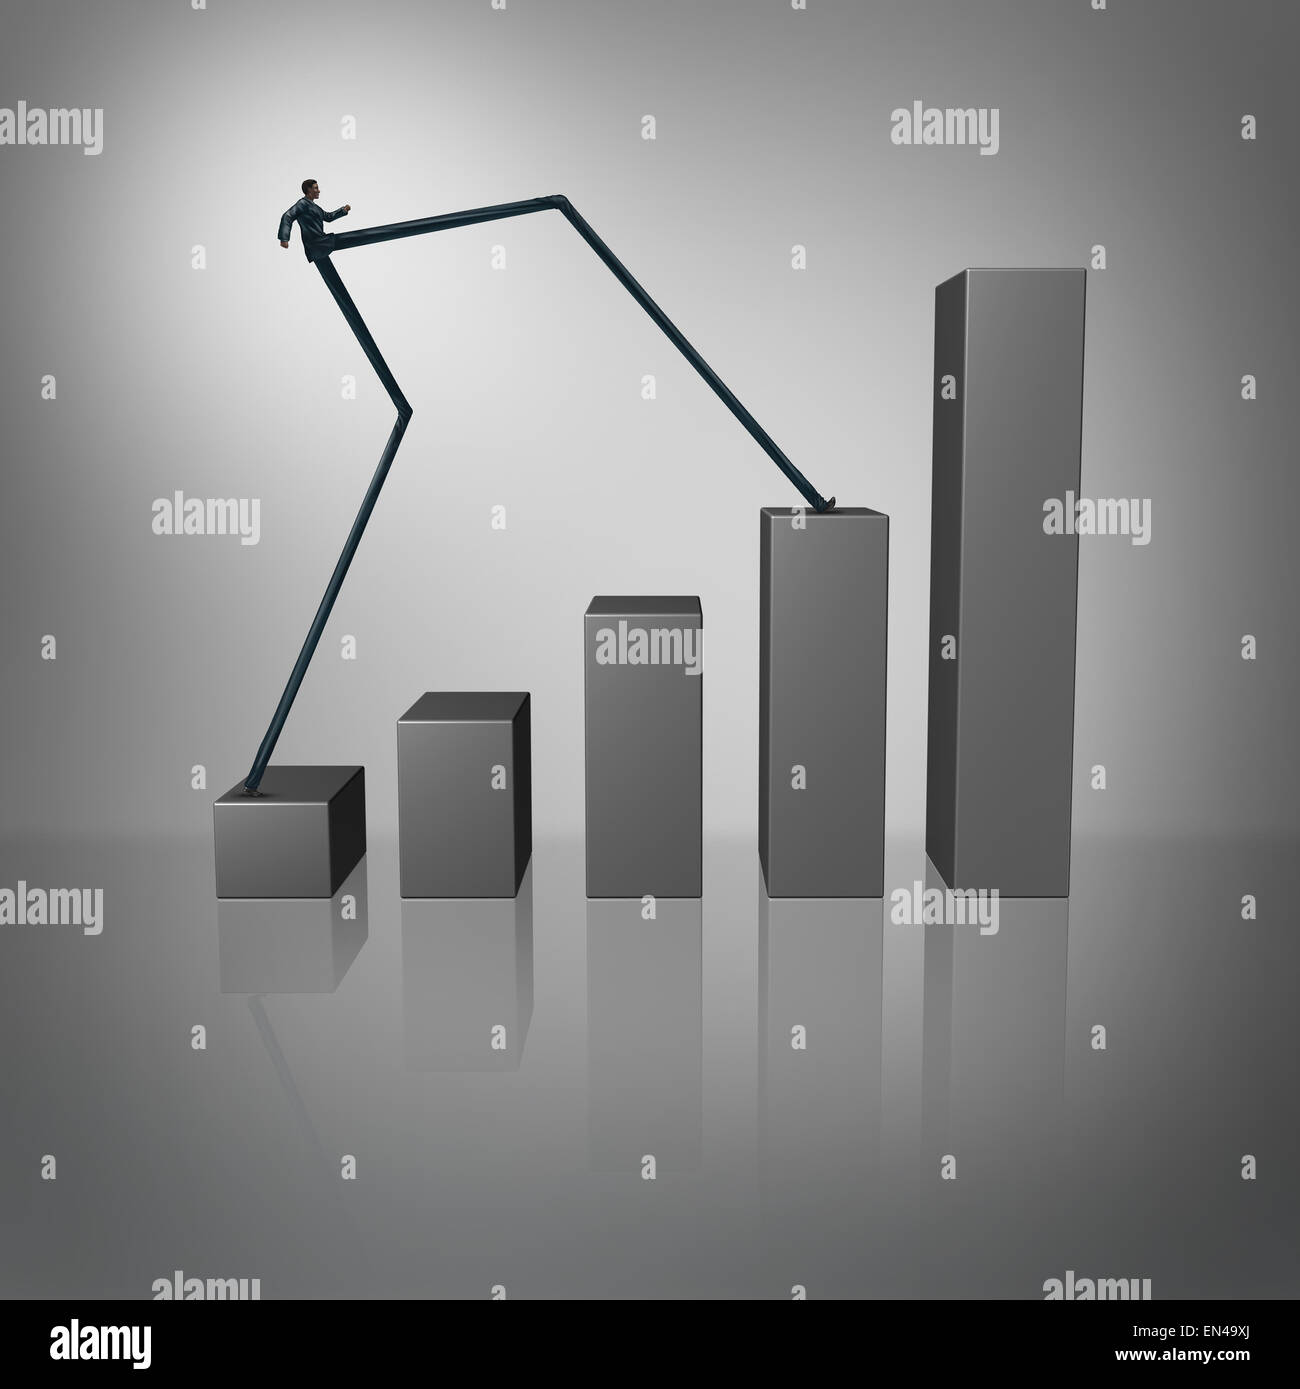 Leap forward as an accelerated success business concept with a businessman with long legs climbing a financial chart or graph as a metaphor for aggressive growth. Stock Photo